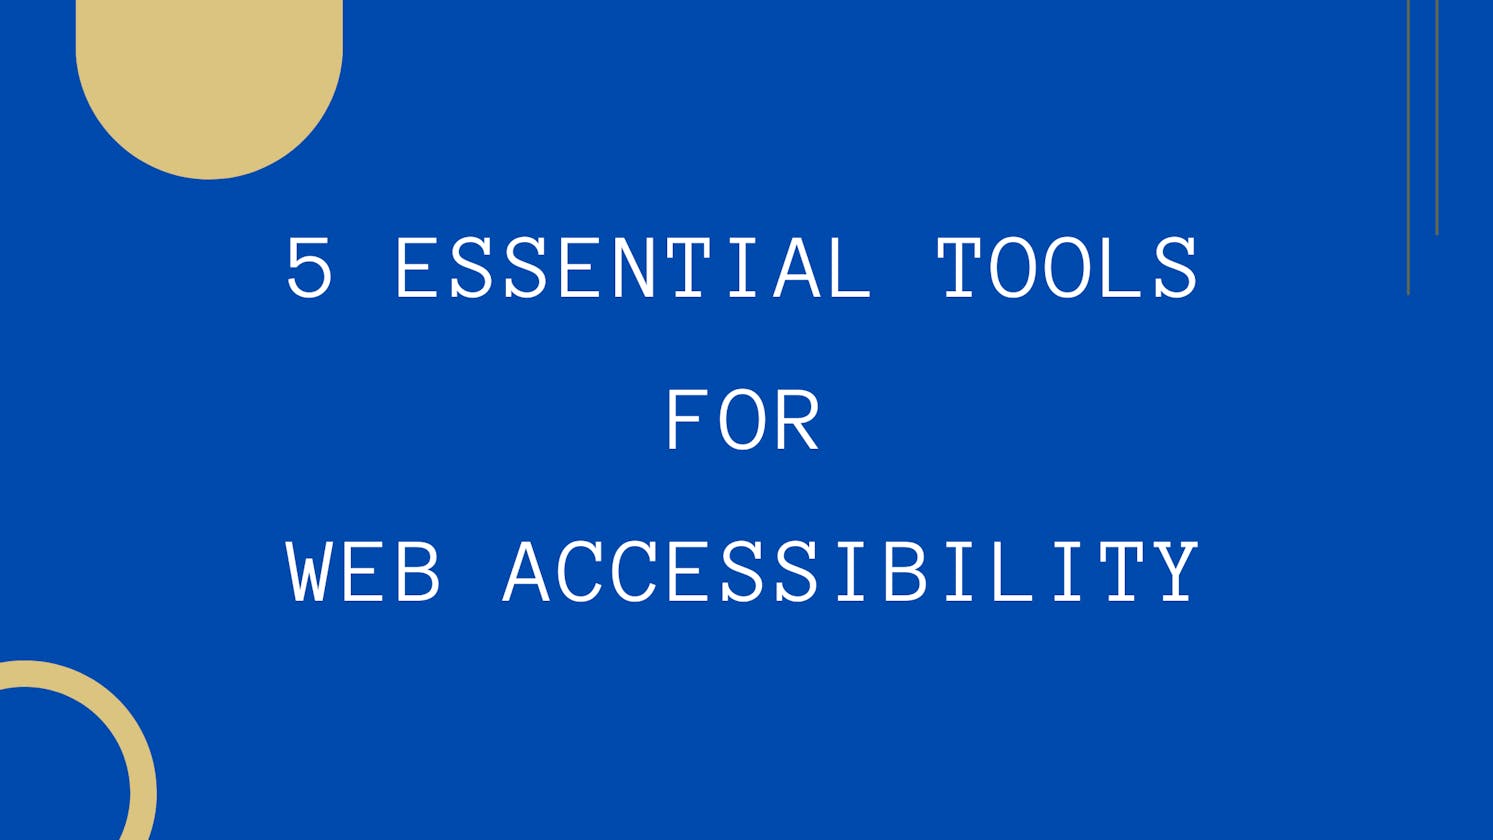 5 Essential Tools for Web Accessibility